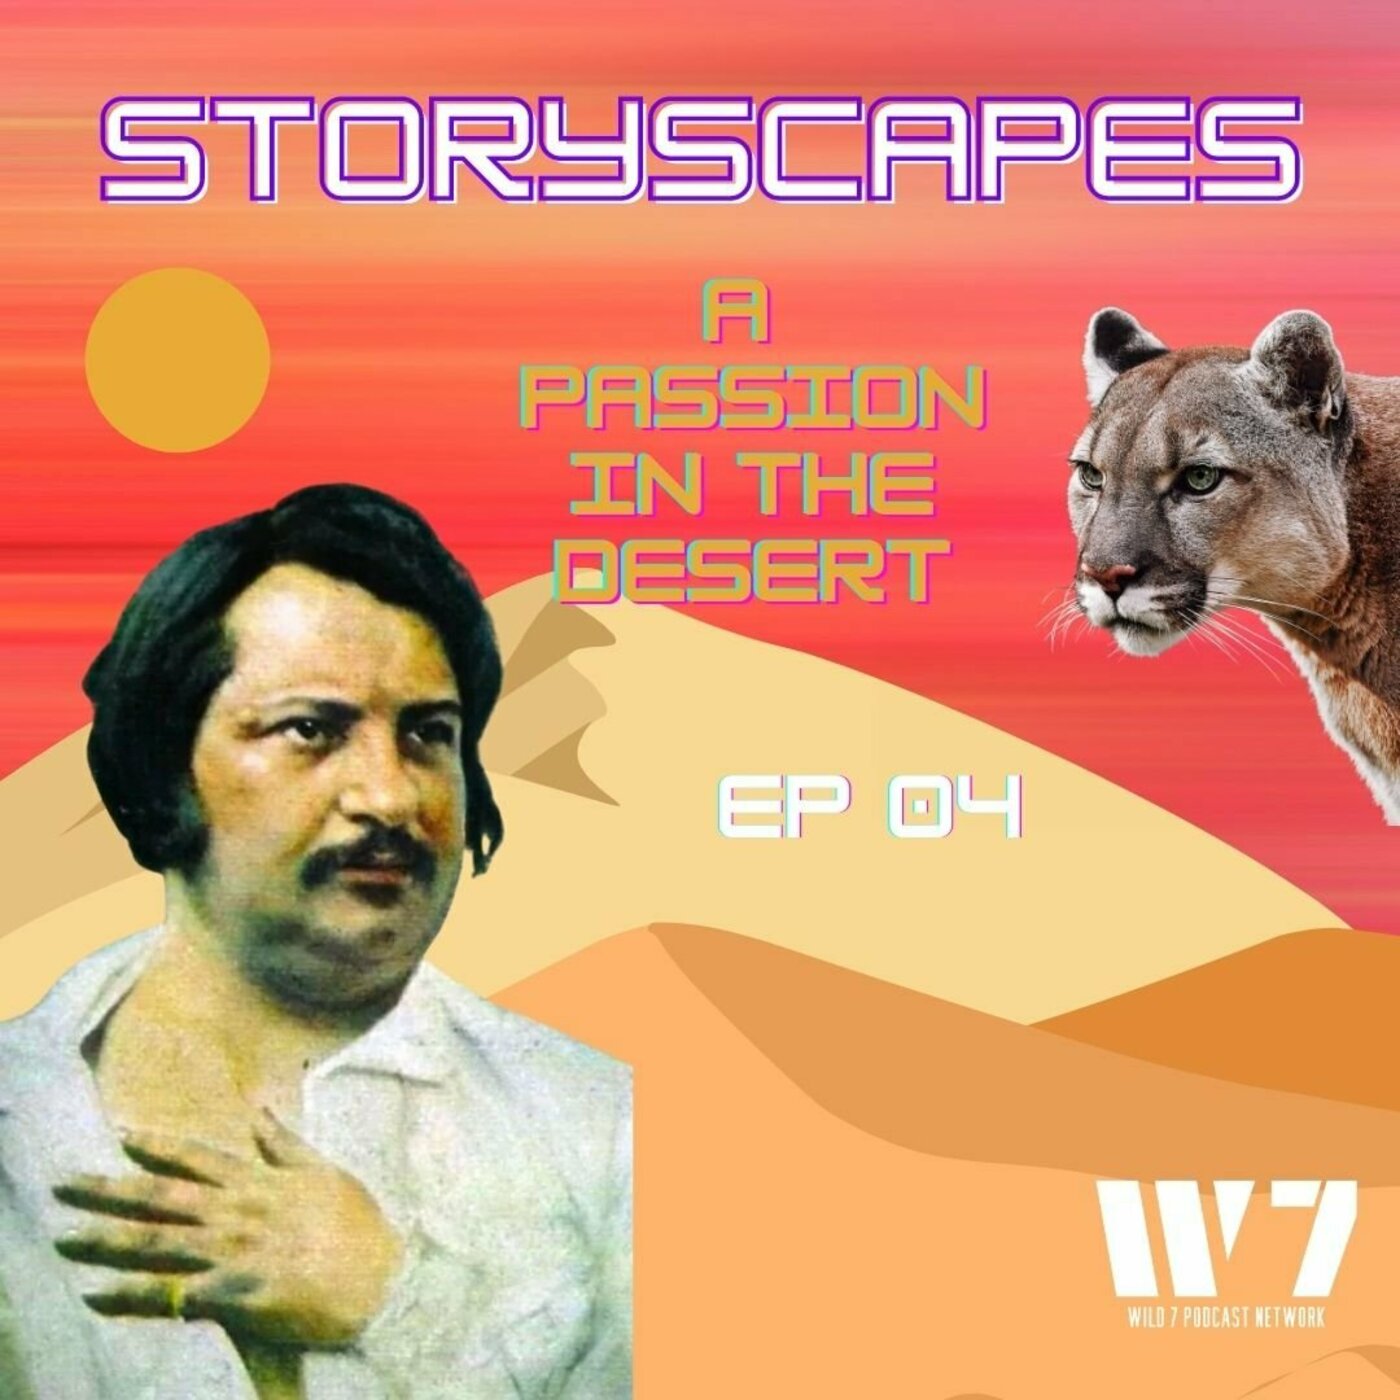 Episode 04 - A Passion in the Desert - by Honoré de Balzac - STORYSCAPES